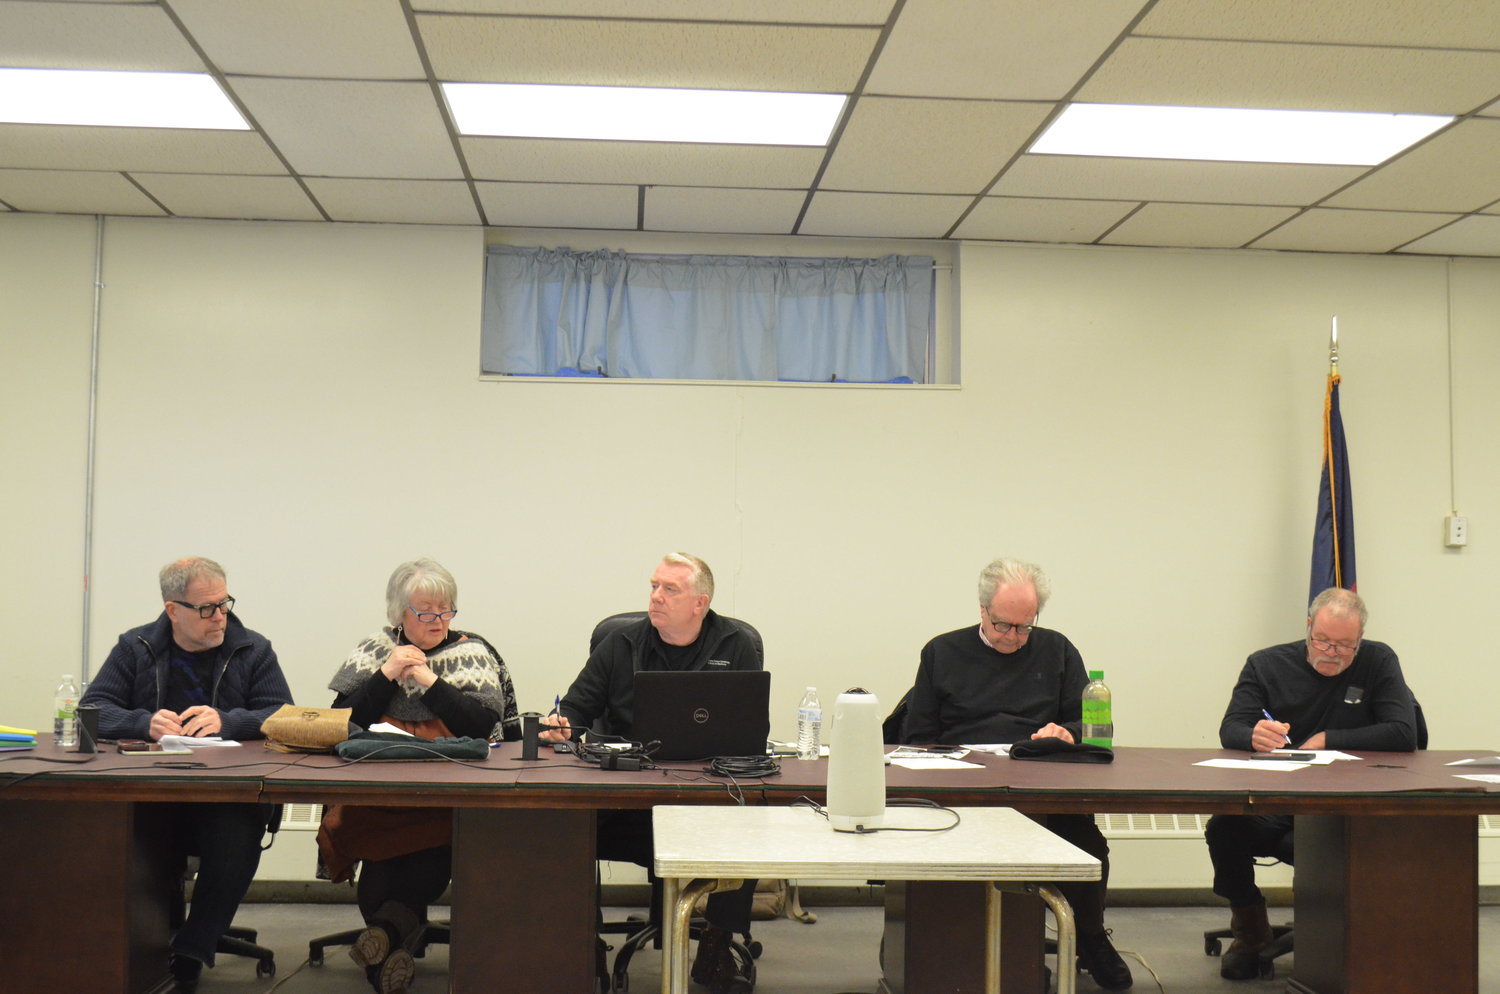 The Tusten Town Board, with board member Greg Triggs, left; board member Jane Luchsinger; town supervisor Ben Johnson; board member Kevin McDonough; and board member Bruce Gettel, in discussion at a March 14 town board meeting.